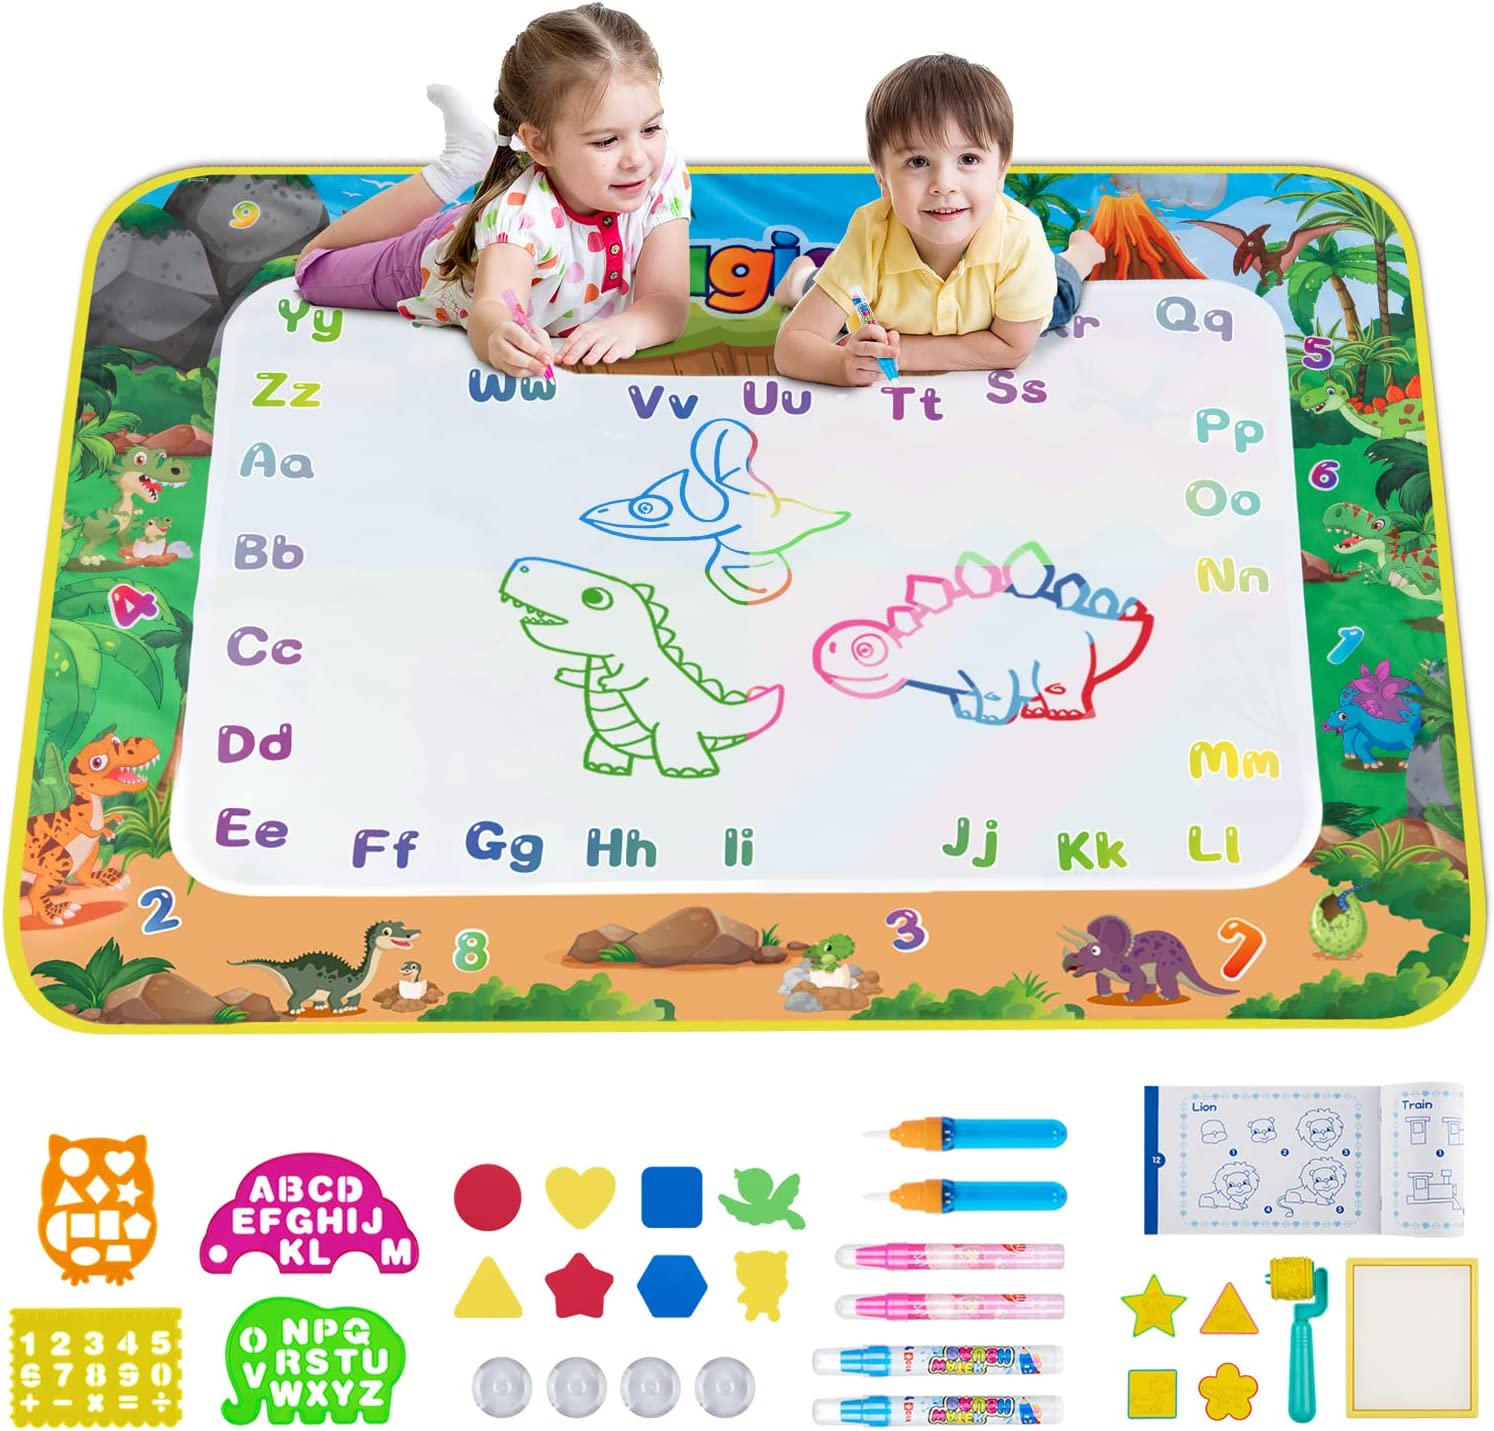 Obuby Water Magic Mat Kids Doodle 58 x 42 Inches Extra Large Dinosaur Drawing Coloring Mats Educational Toys Gifts for Boys Girls Toddlers Age 3 Up